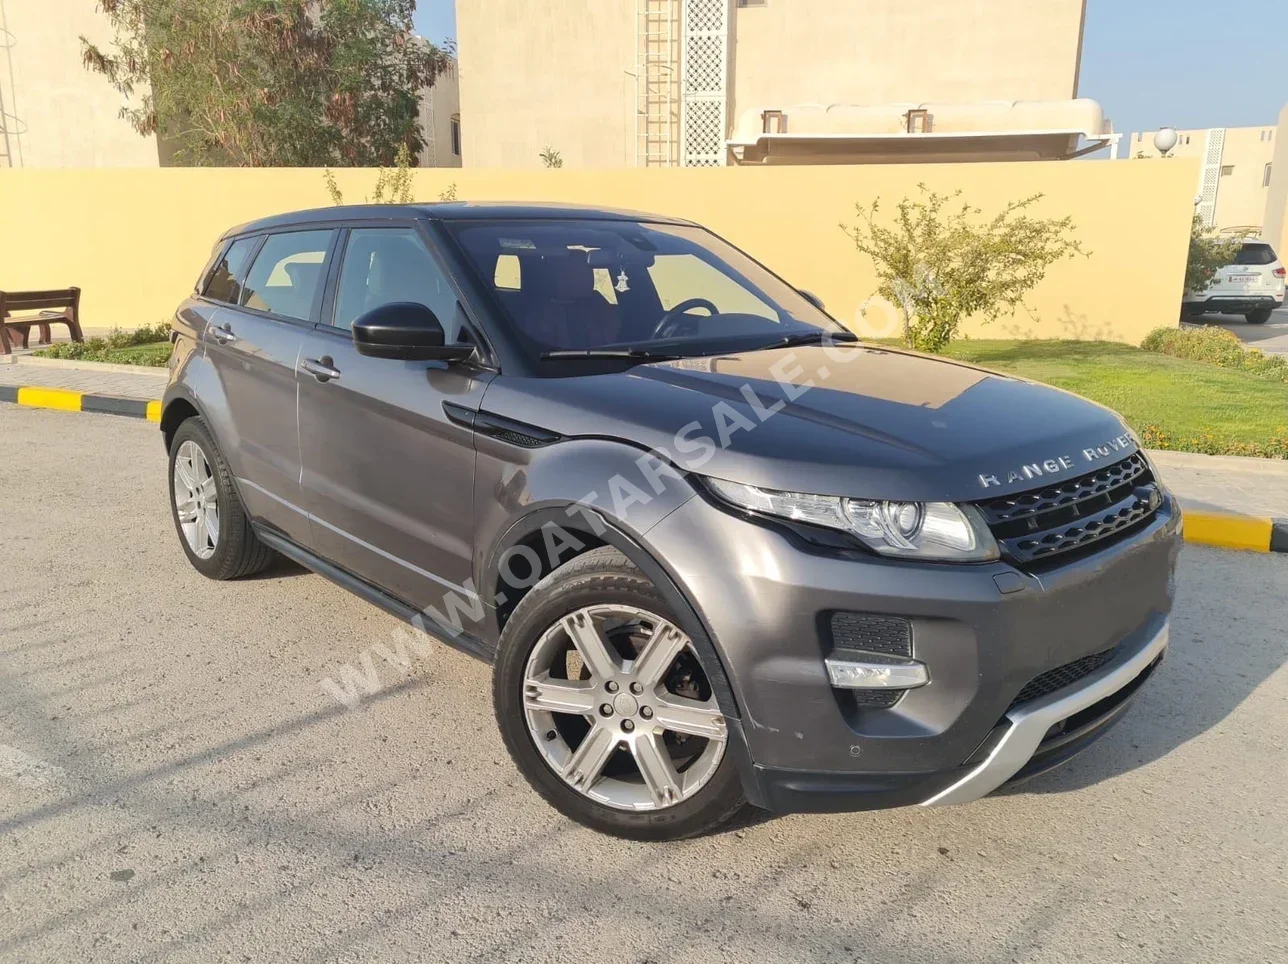 Land Rover  Evoque  Dynamic  2015  Automatic  150,000 Km  4 Cylinder  Four Wheel Drive (4WD)  SUV  Gray